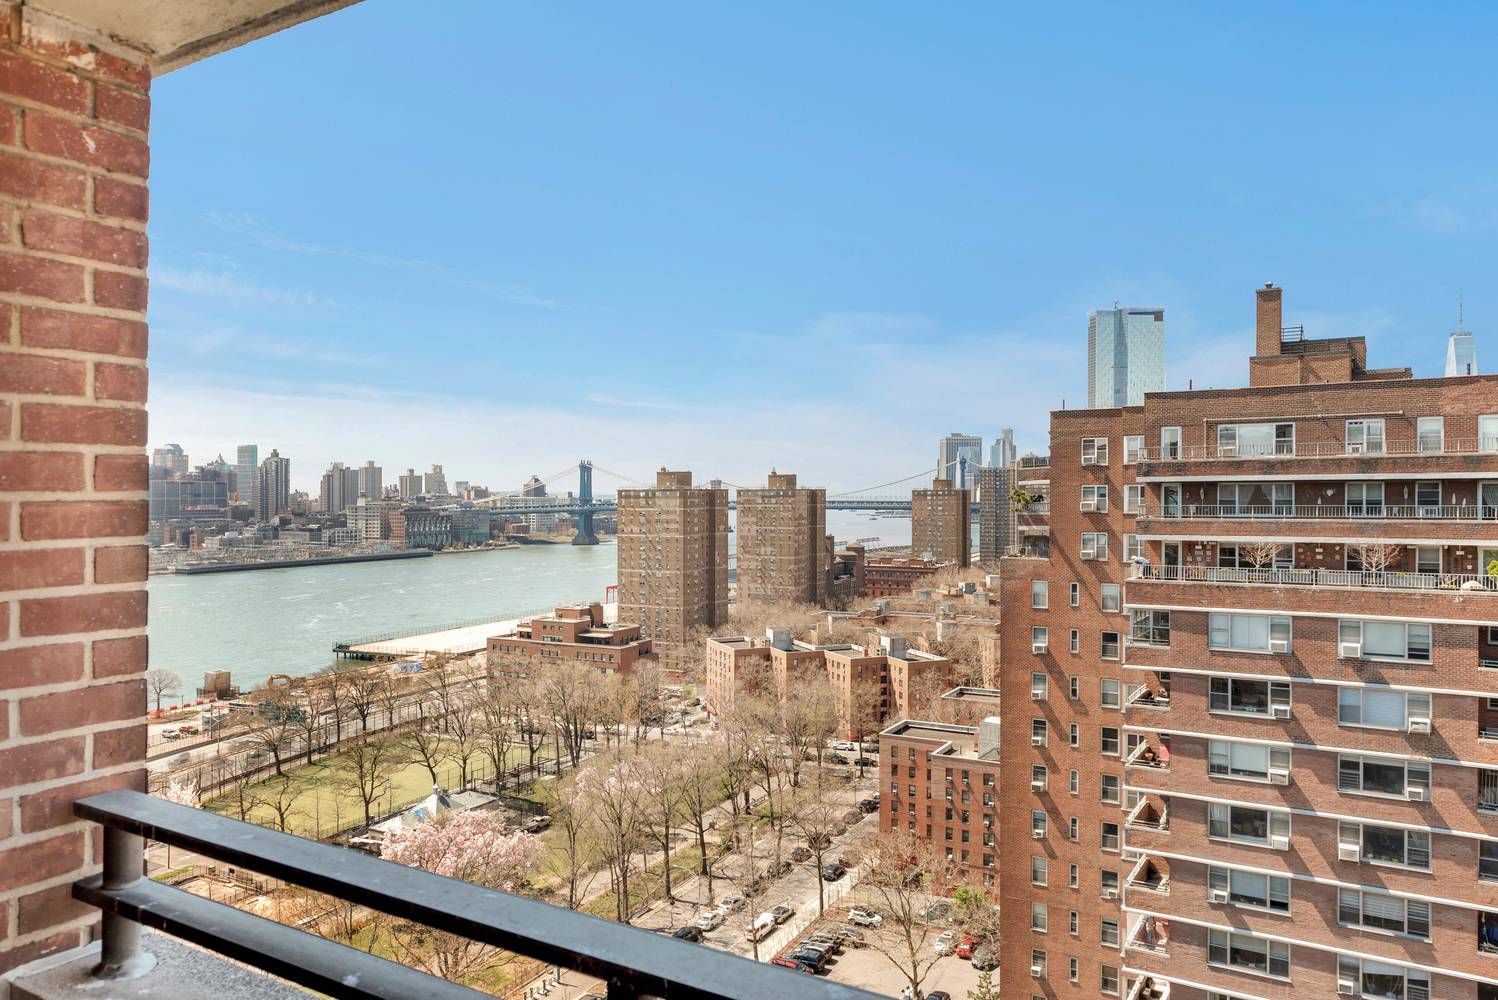 SUN SPLASHED amp ; Voluminous 1 Bedroom perfectly perched on the 20th floor of the building's South Western Corner, affording open views of the East River, the Manhattan Bridge, the ...